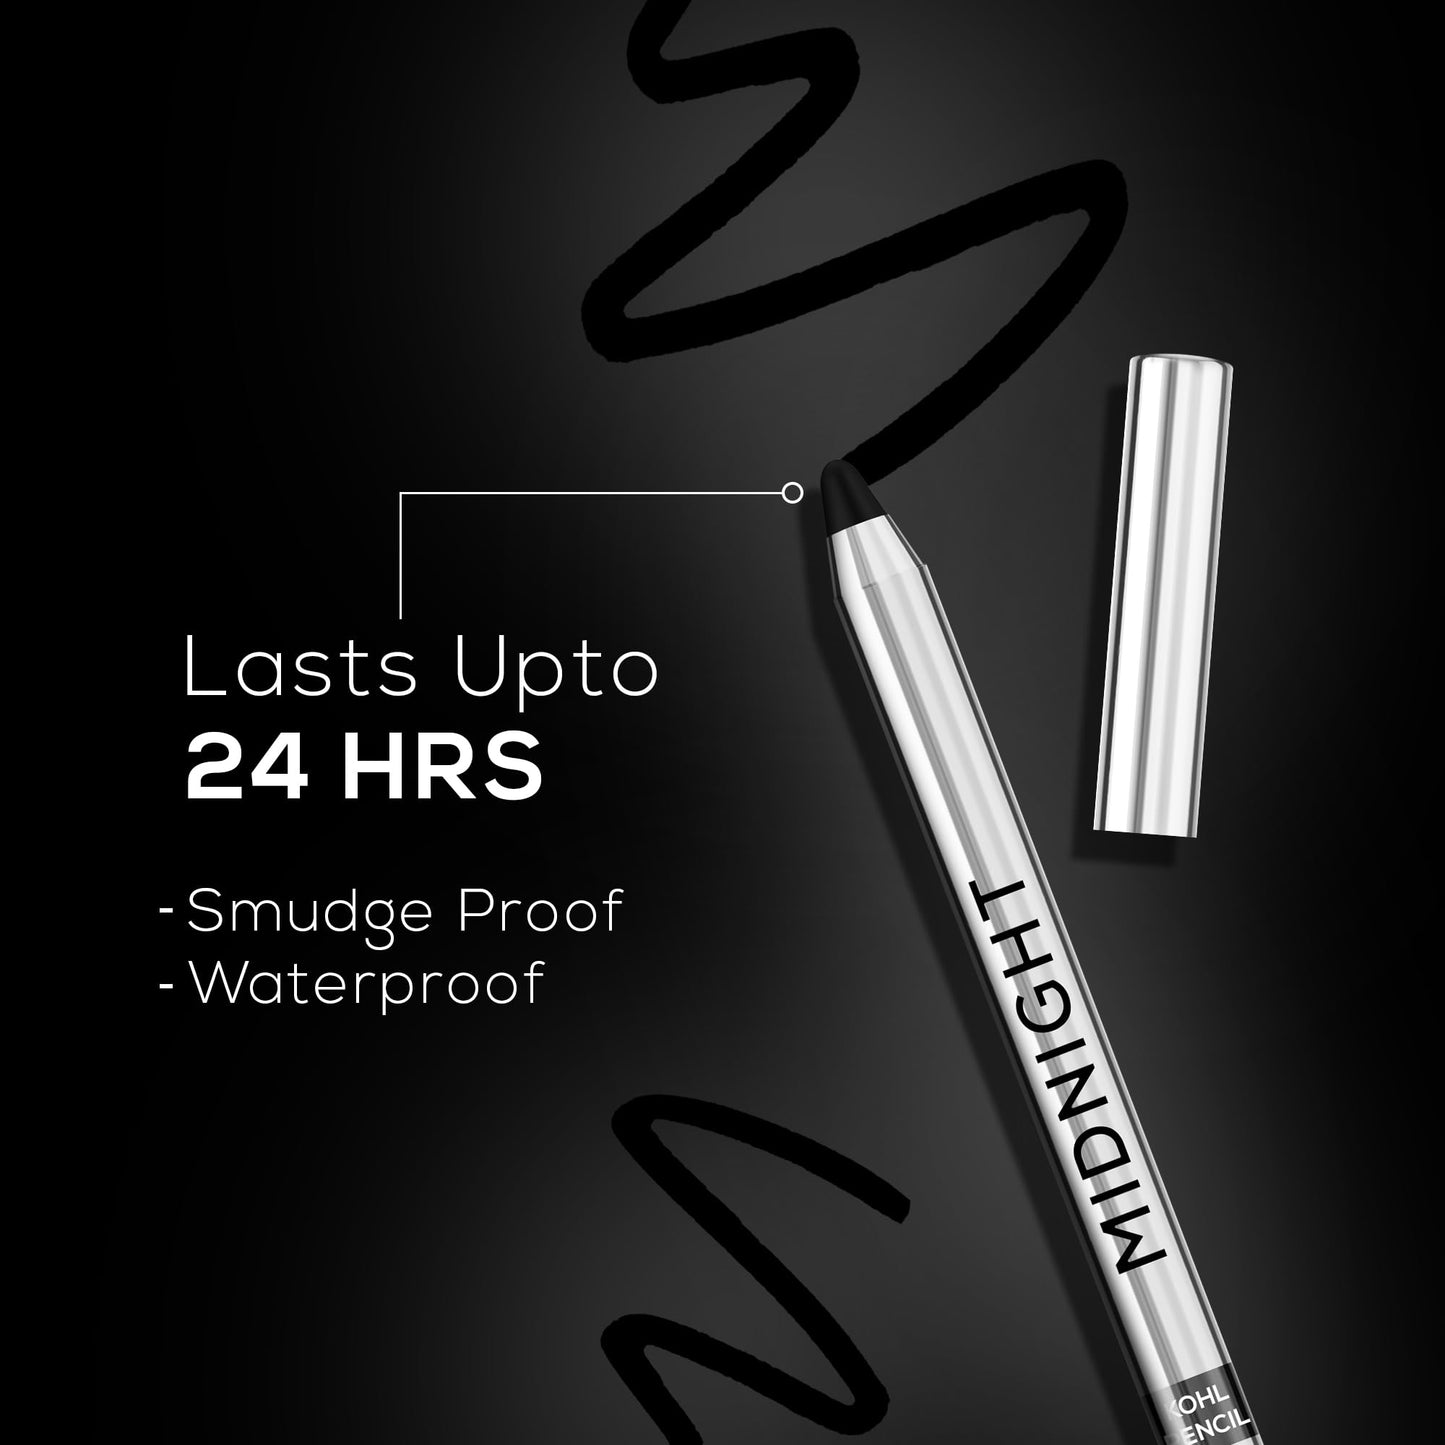 RENEE Midnight Kohl Pencil - Smudgeproof and Waterproof Kajal - 24 Hrs Long Stay - Darkest Black - One Swipe Application - Rich Color Payoff - Vitamin E, Olive Oil and Castor Oil - 1.5 Gm